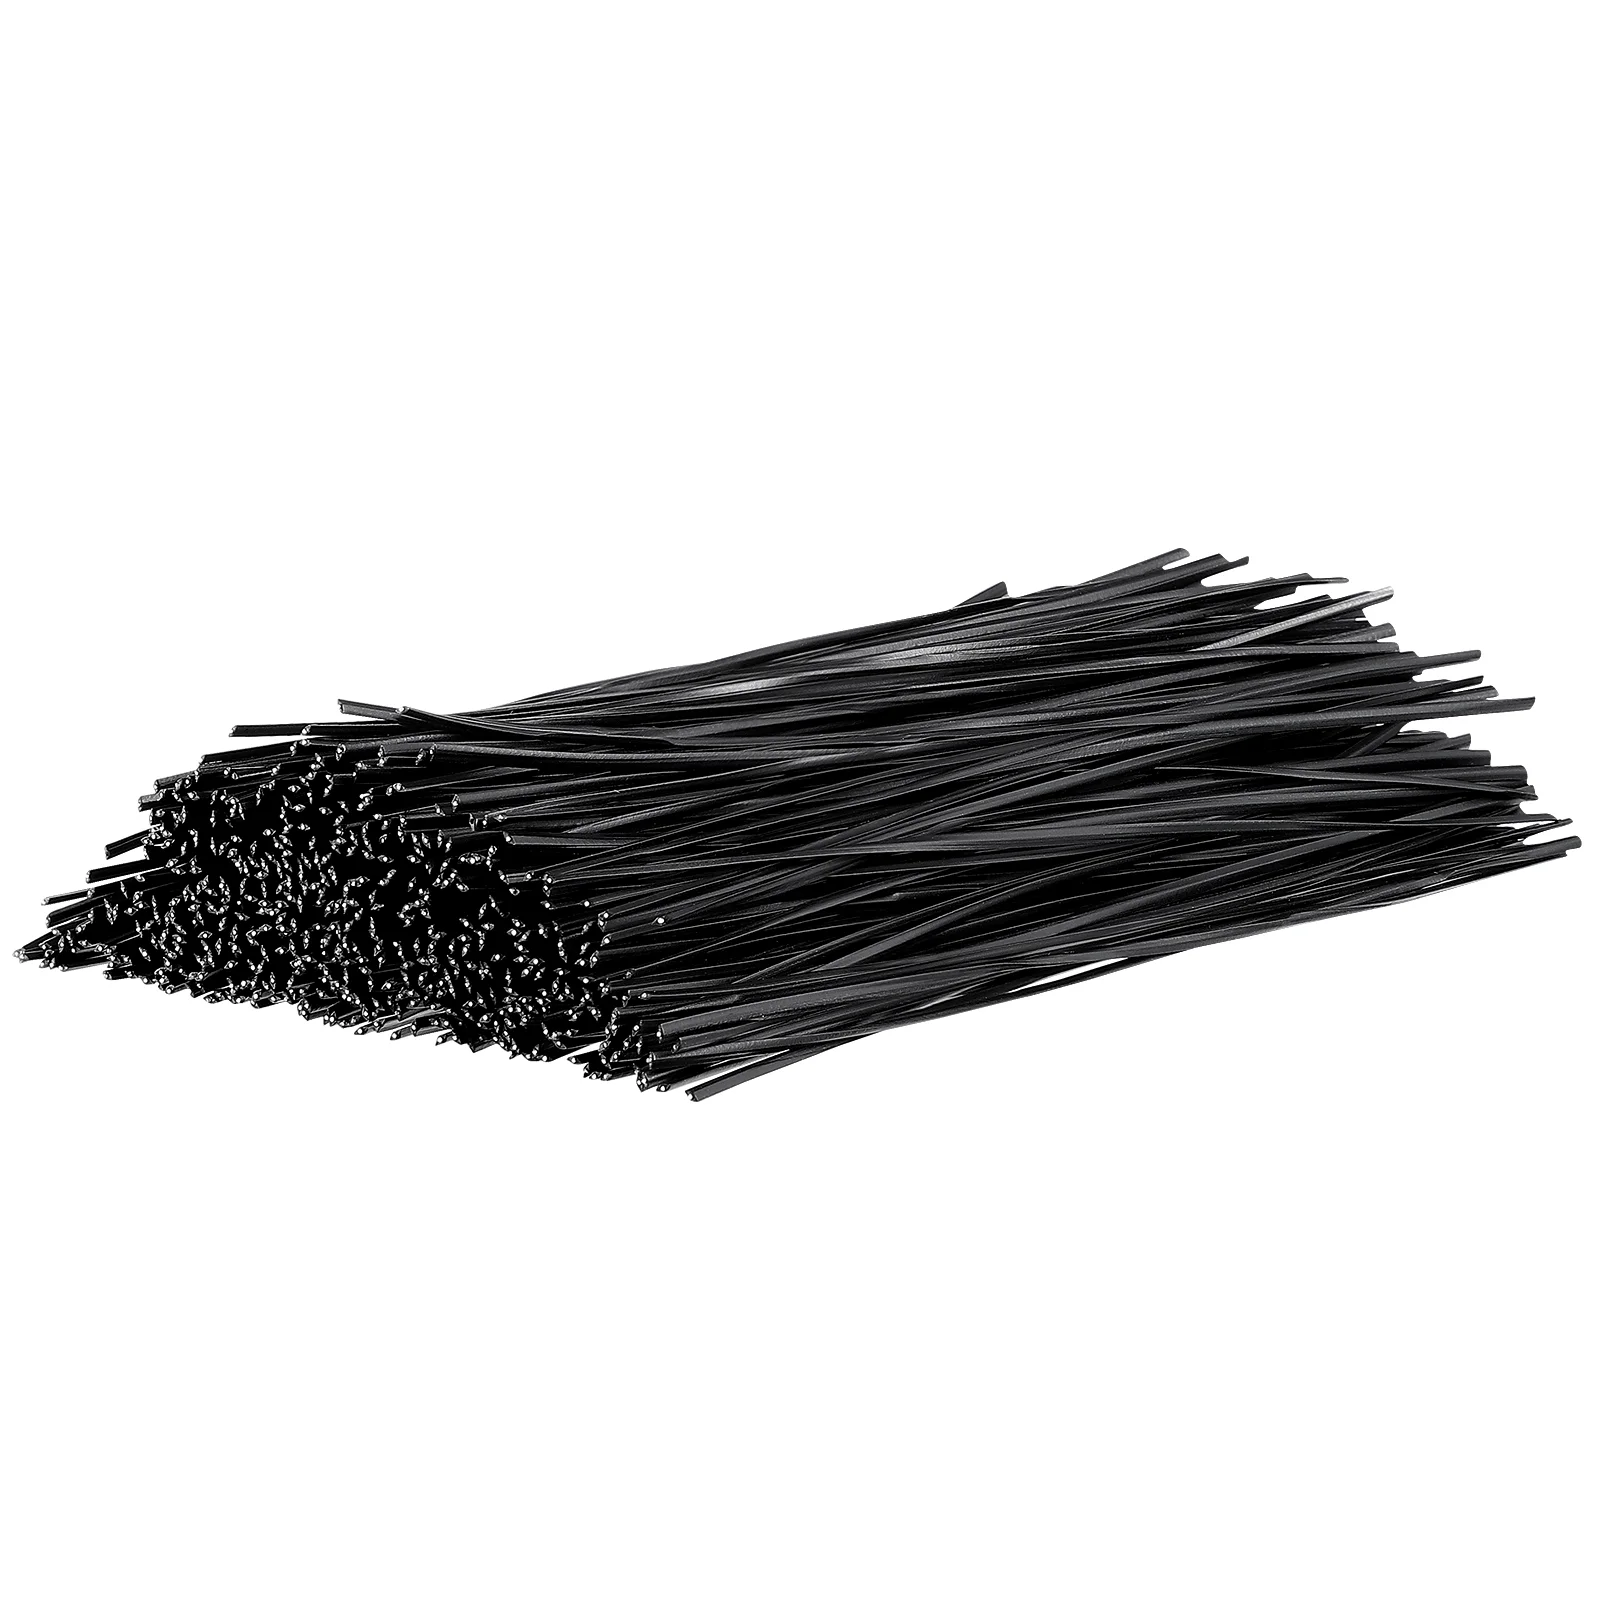 

500 Pcs Ties Black Twists Heavy Duty Grape Twisting For Bags Wire Cord Cable Organizer